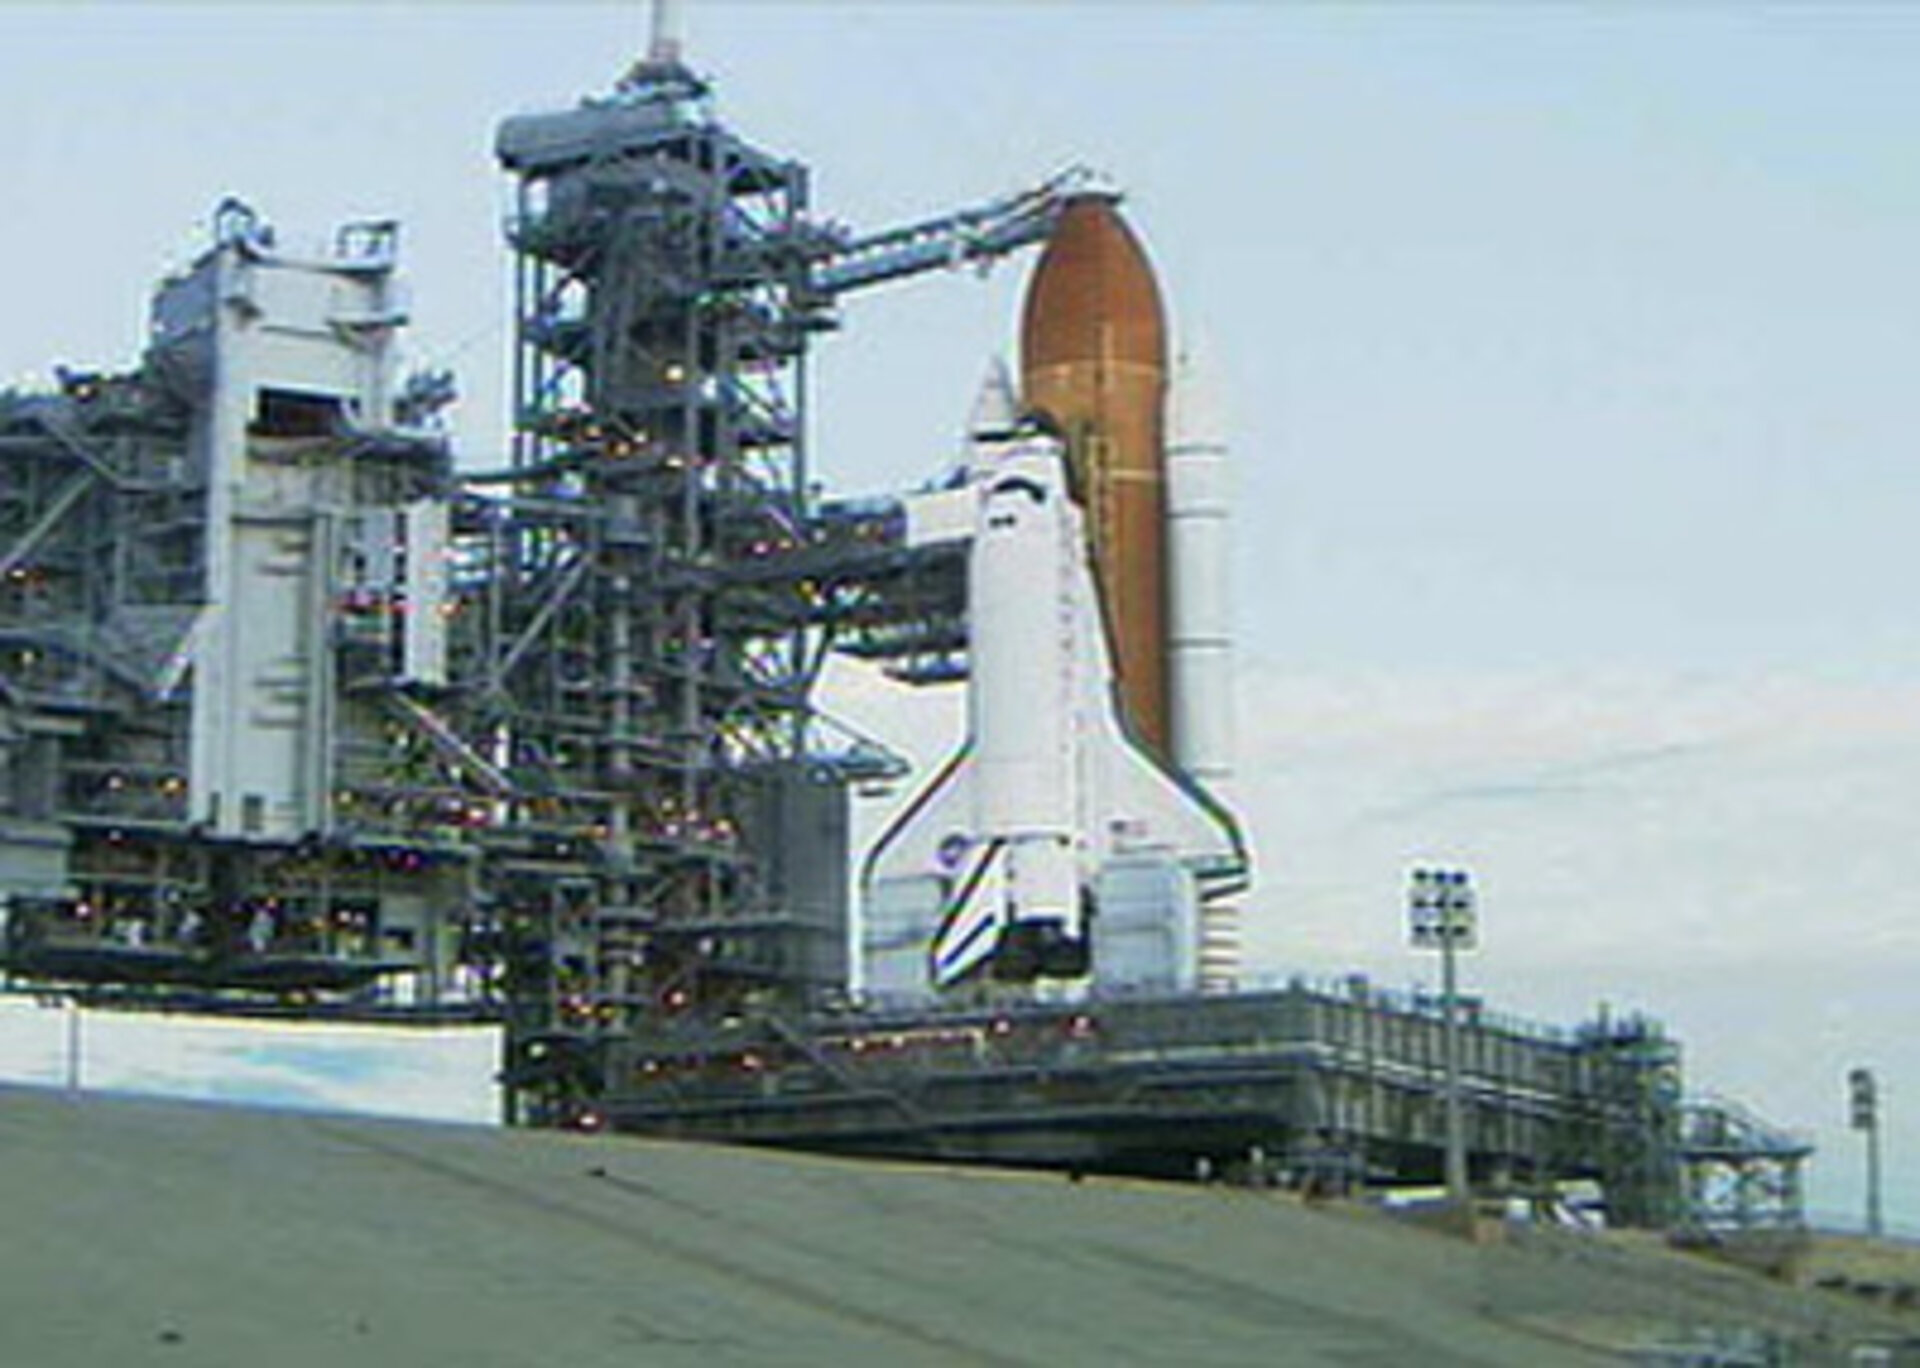 The rotating service structure on Launch Pad 39B is rolled back to reveal Space Shuttle Discovery